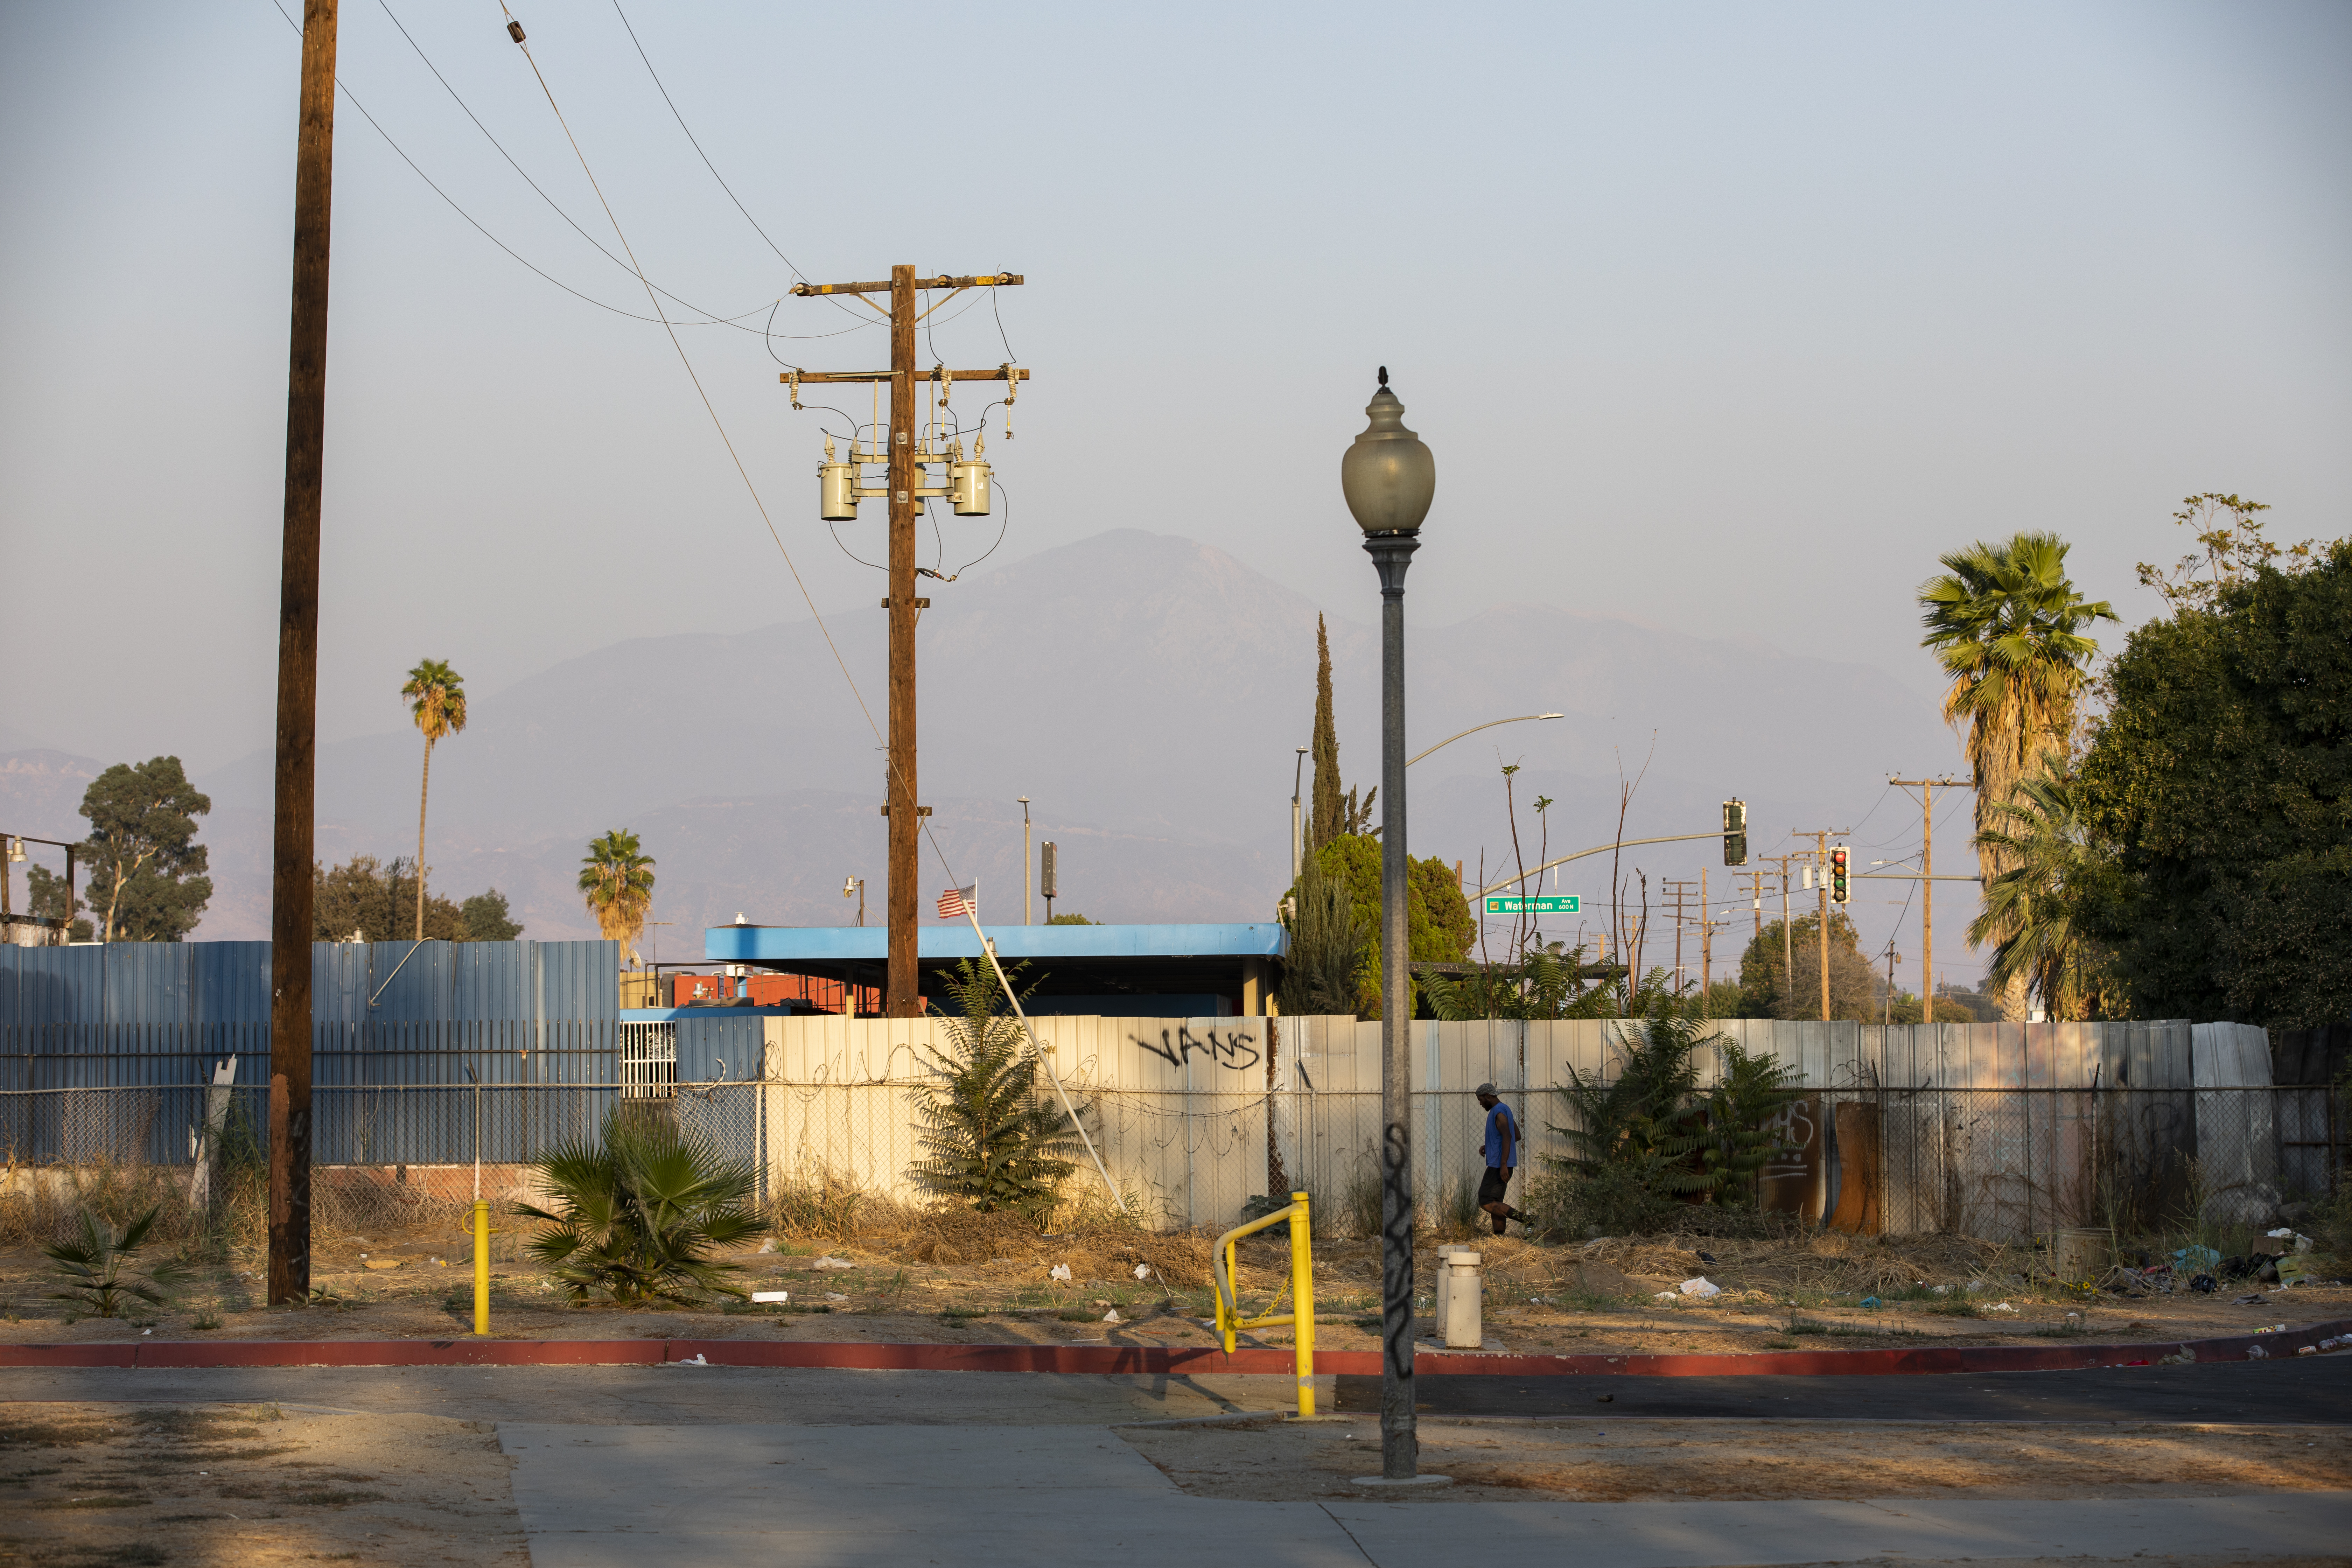 A lone man walks on a tattered, chipped sidewalk abutting a tagged fence. Litter is strewn on the ground and smog hides the mountains in the horizon.